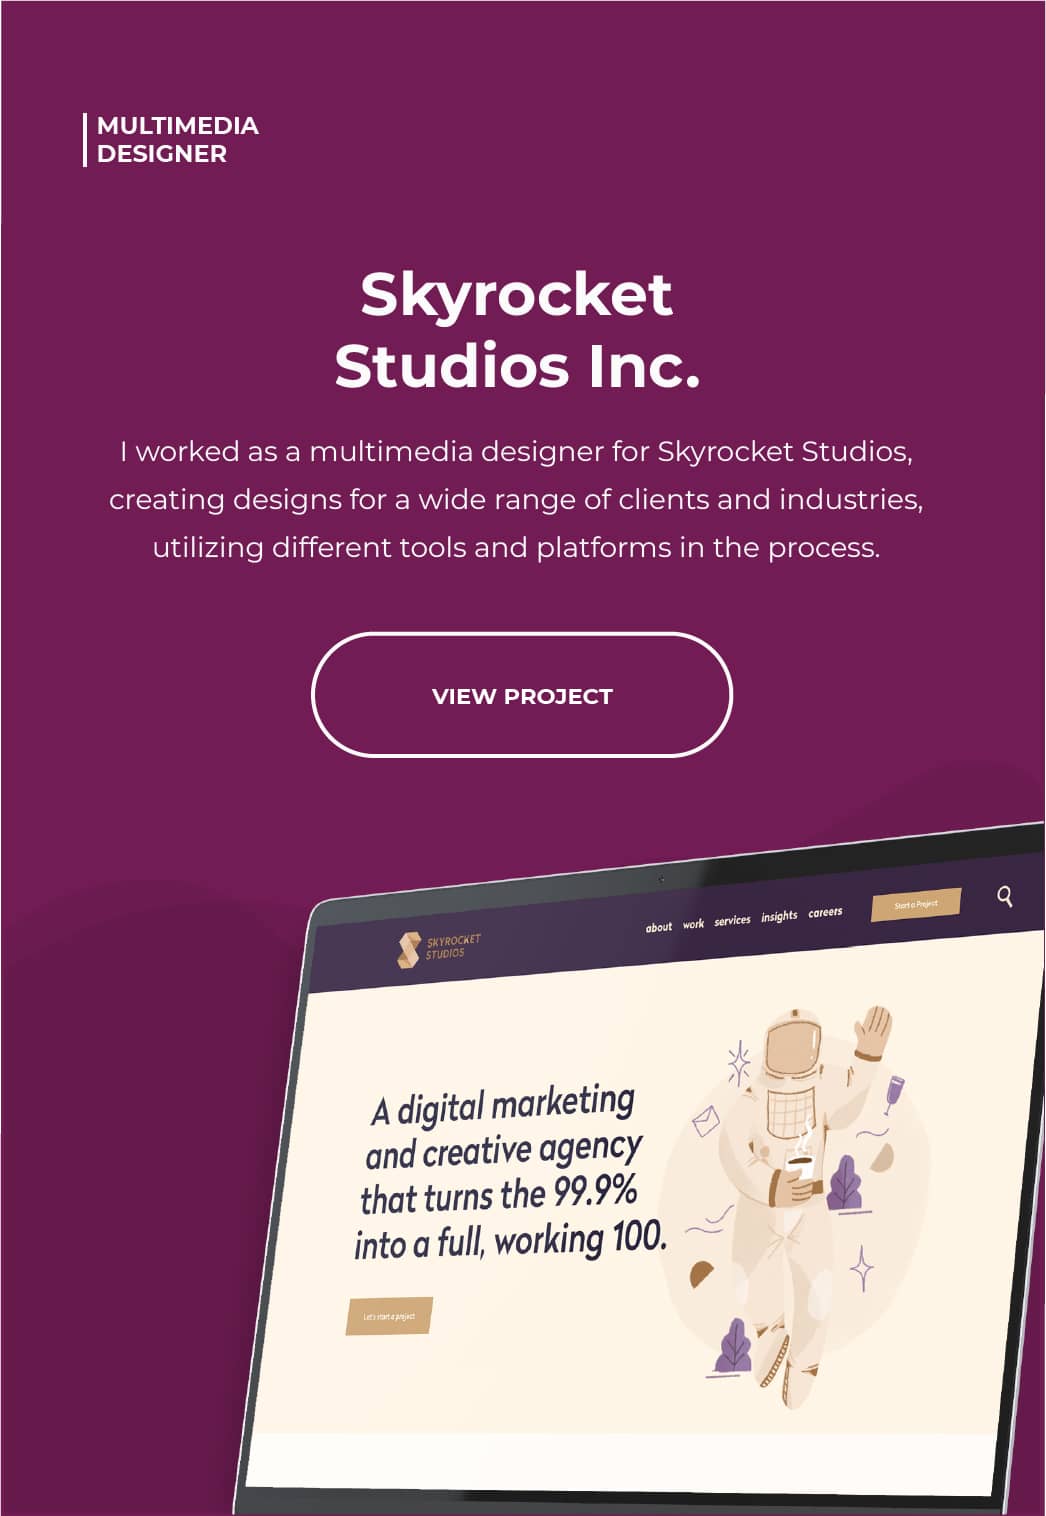 Read about my work at Skyrocket Studios